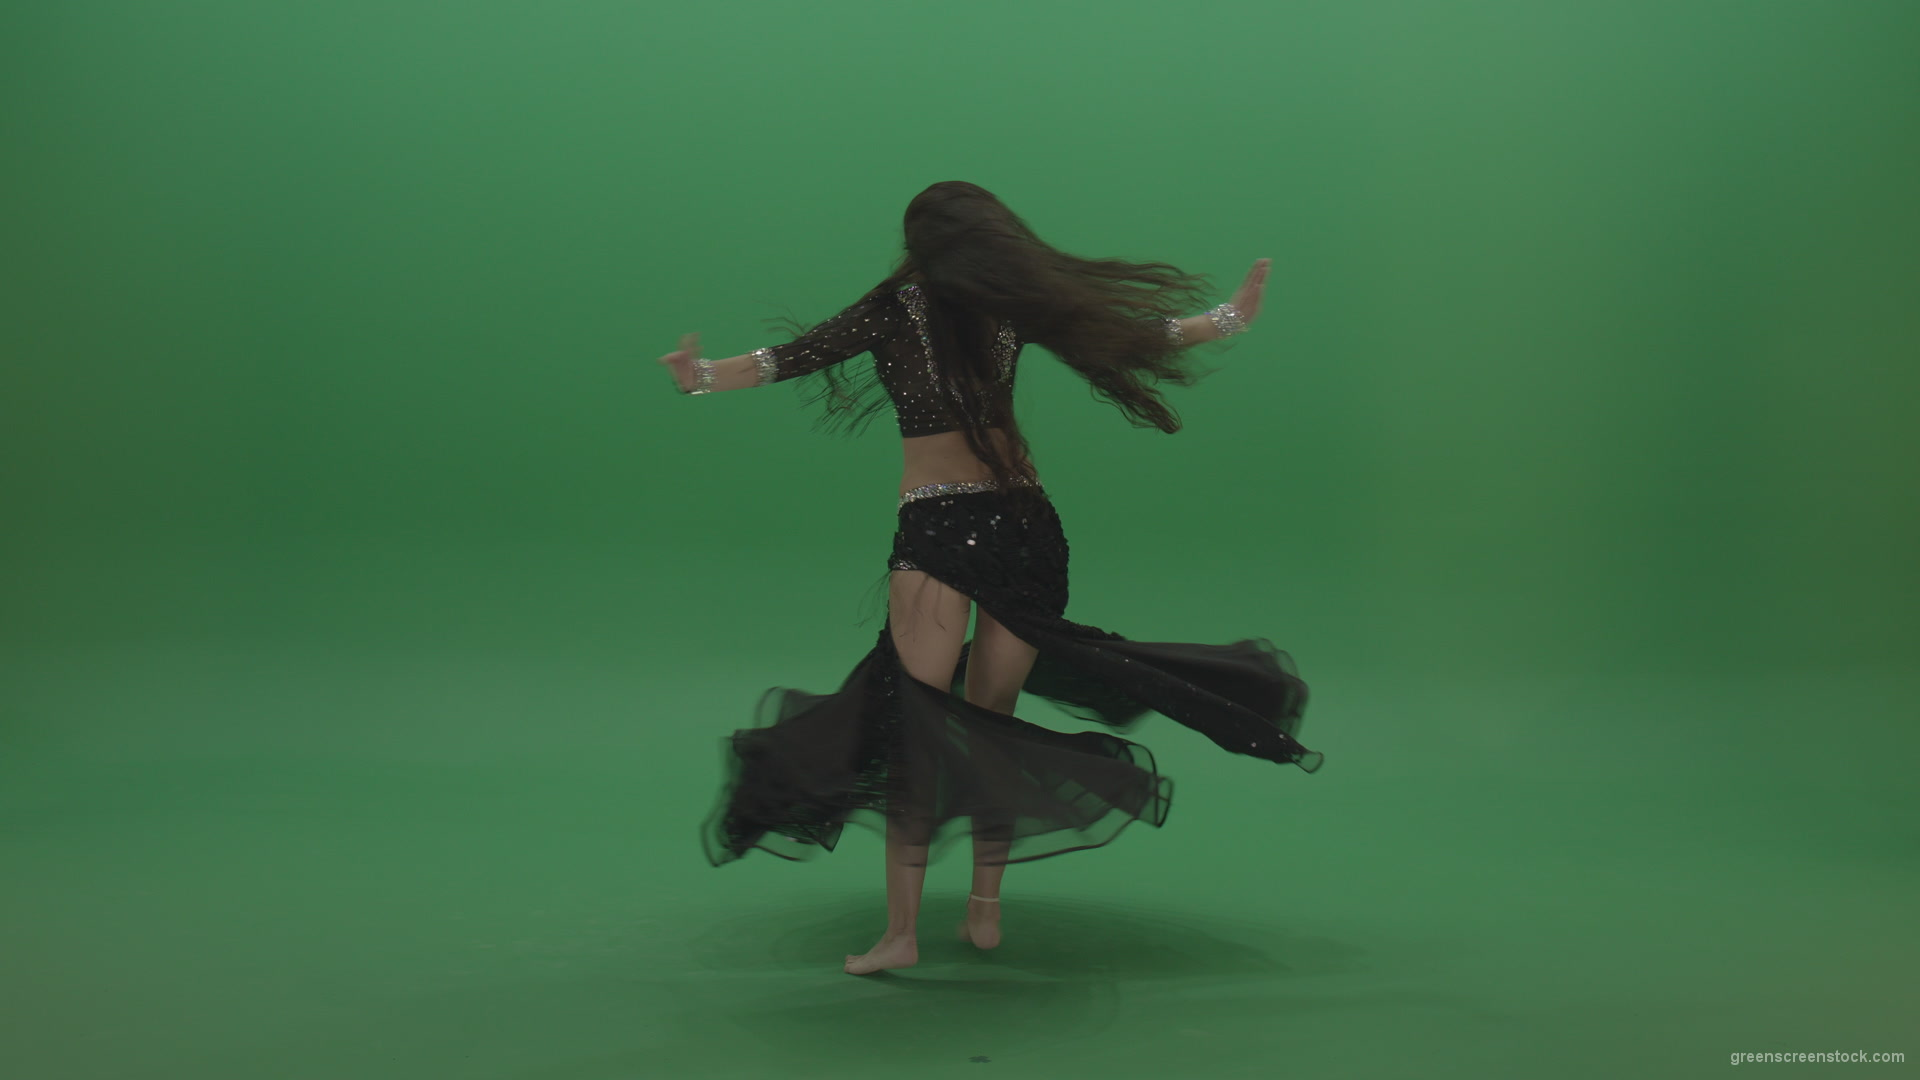 Appealing-belly-dancer-in-black-wear-display-amazing-dance-moves-over-chromakey-background_004 Green Screen Stock